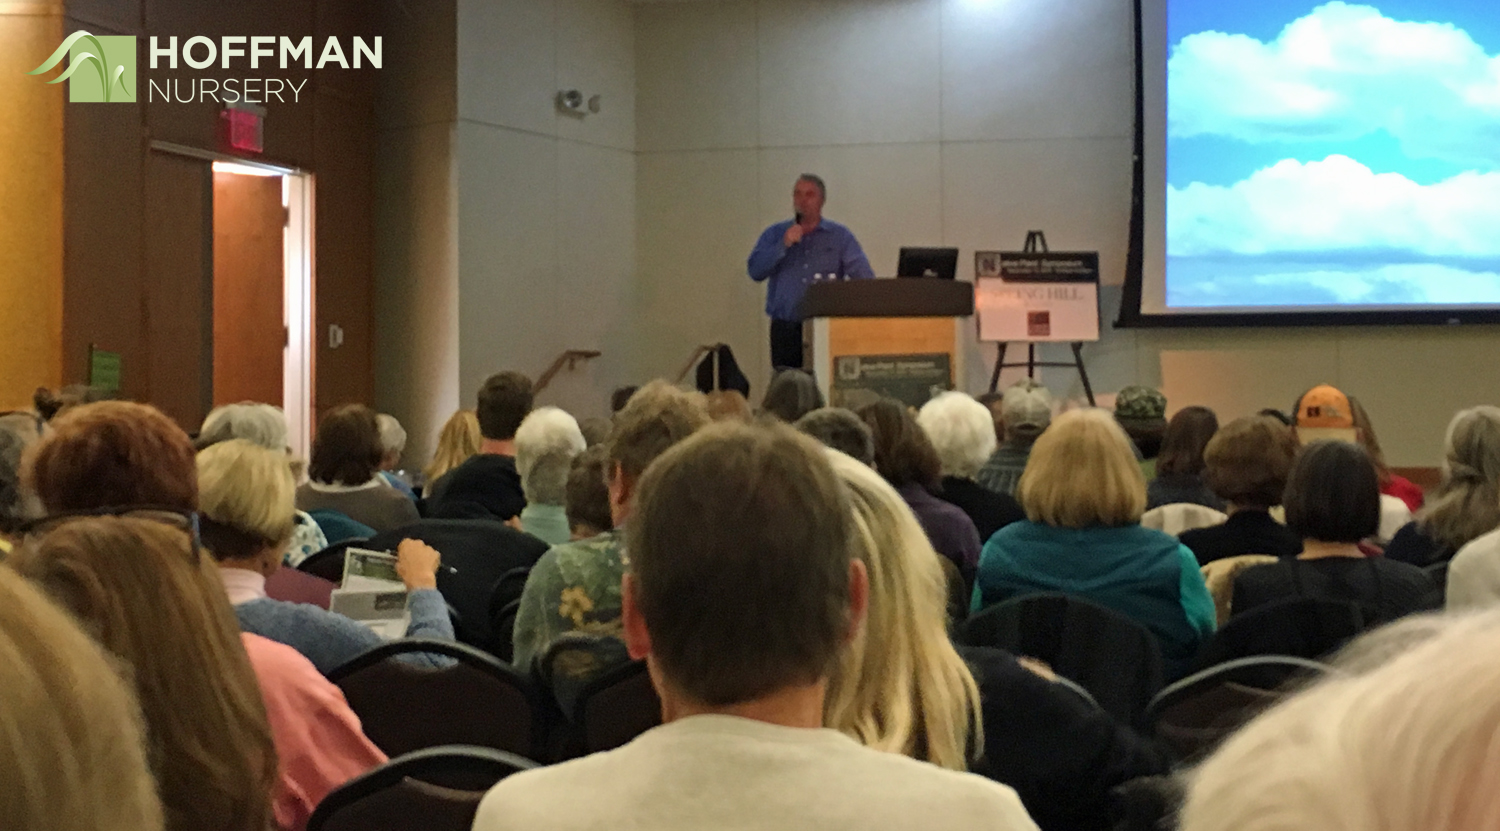 Scott Beuerlein from the zoo hosted the symposium activities. It was a sell-out crowd, with more than 280 participants.